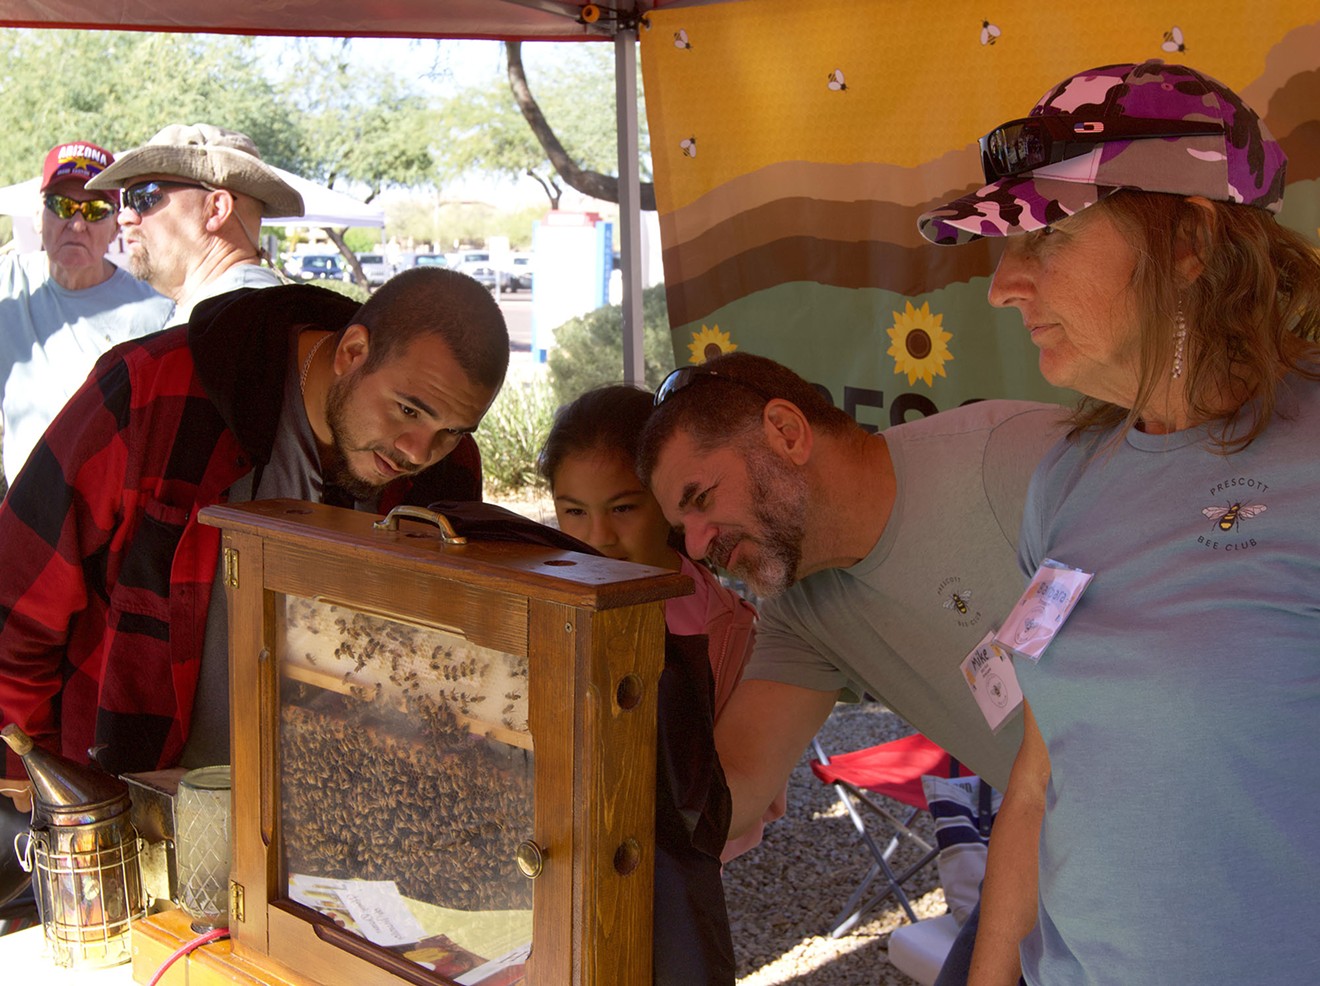 Prescott beekeepers show off their wooden beehive display at the November 2023 Arizona Honeybee Festival in Phoenix. They relocate beehives and provide beekeeping education.